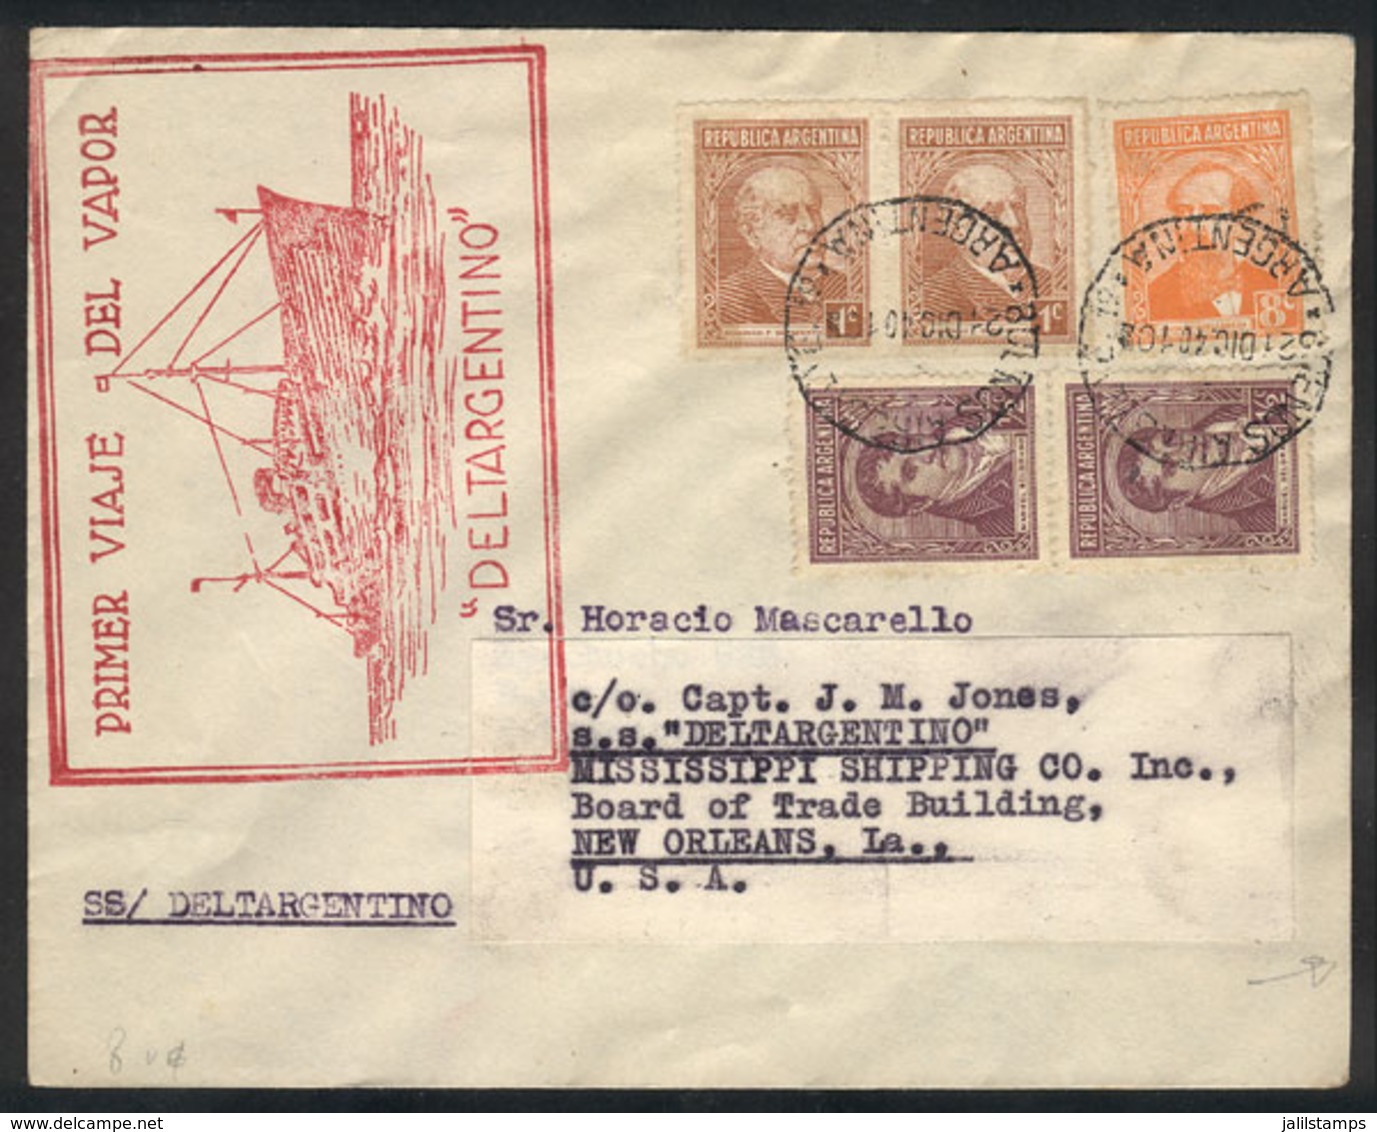 ARGENTINA: 21/DE/1940 First Flight Of Steamer Deltargentino, Cover With Special Handstamp, Very Nice! - Prefilatelia